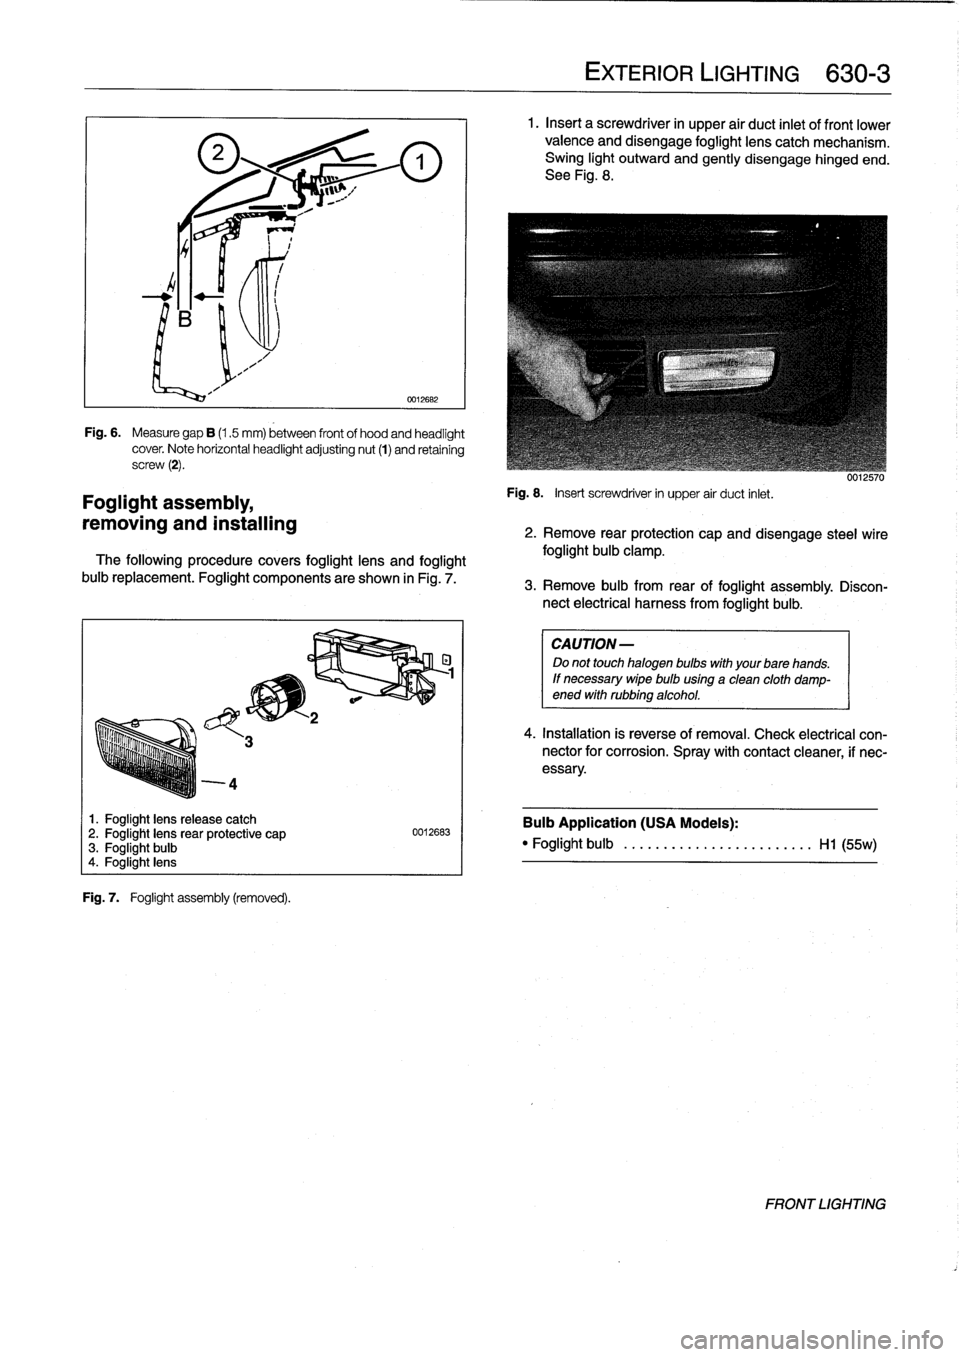 BMW 318i 1996 E36 Workshop Manual 4

Foglight
assembly,

removing
and
installing

1
.
Foglight
lens
release
catch
2
.
Foglight
lensrear
protective
cap
3
.
Foglight
bulb
4
.
Foglight
lens

Fig
.
7
.

	

Foglight
assembly
(removed)
.

0